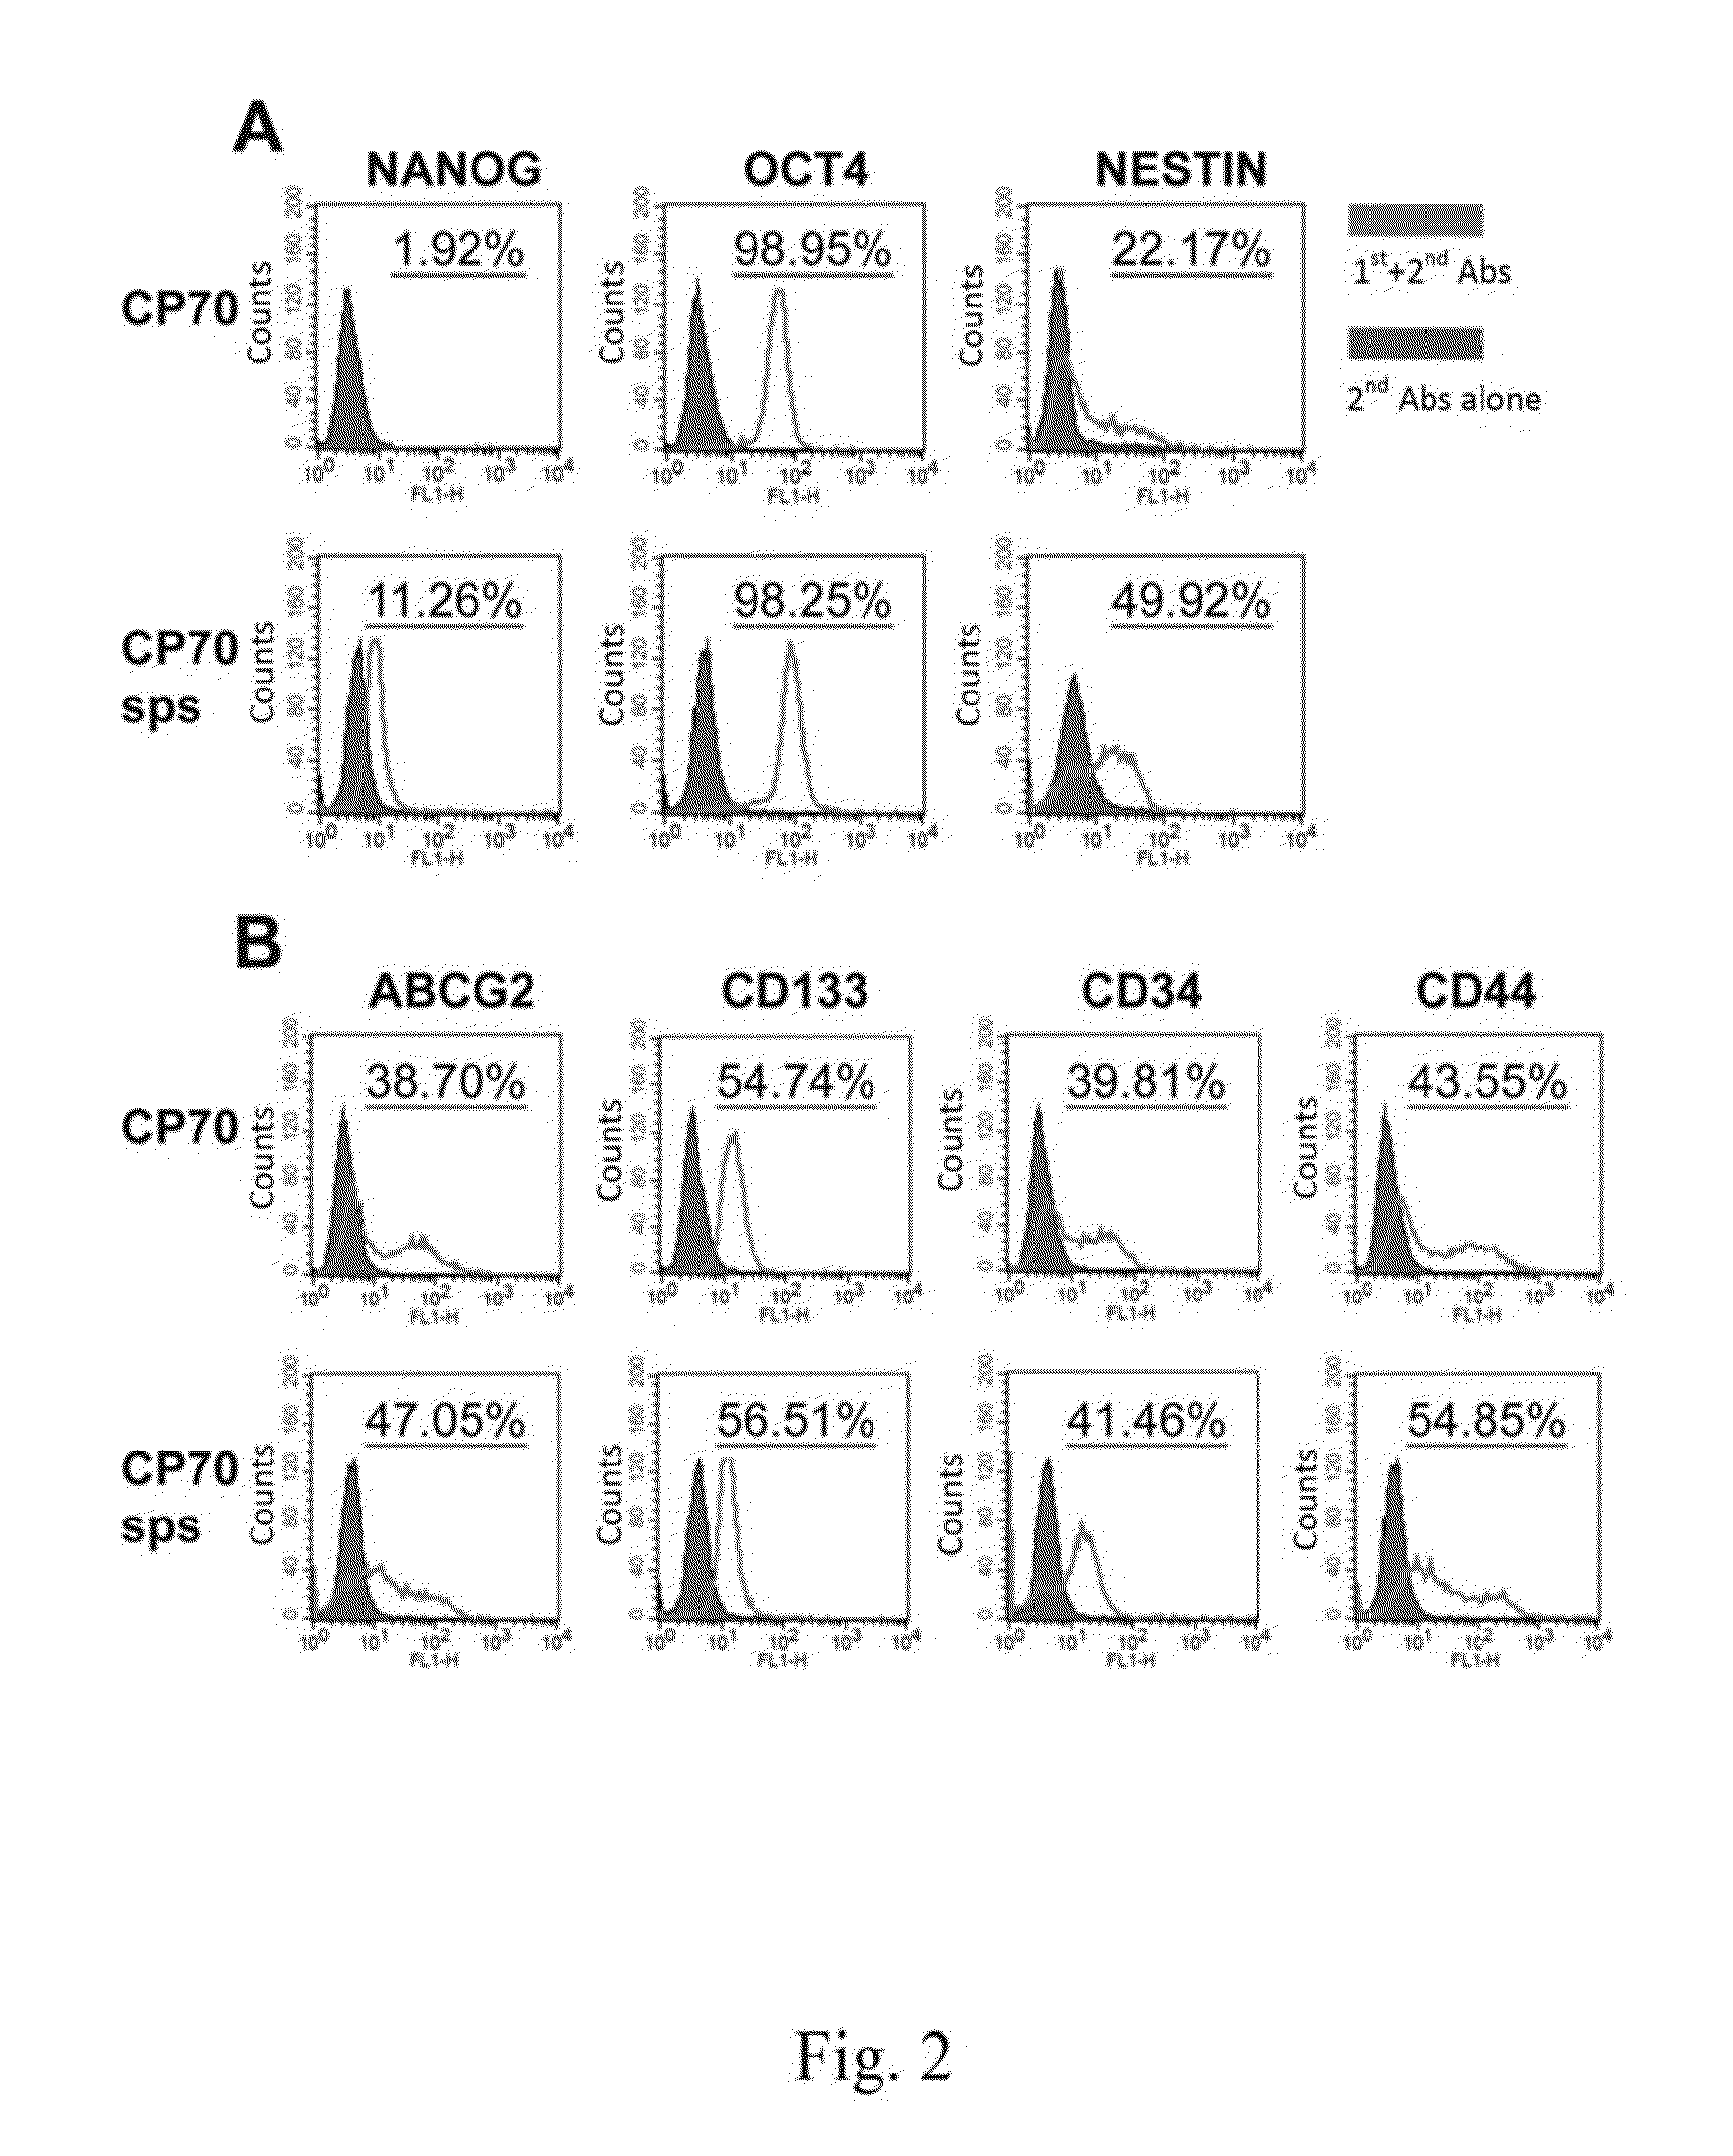 Compounds used for treating cancer and the use thereof